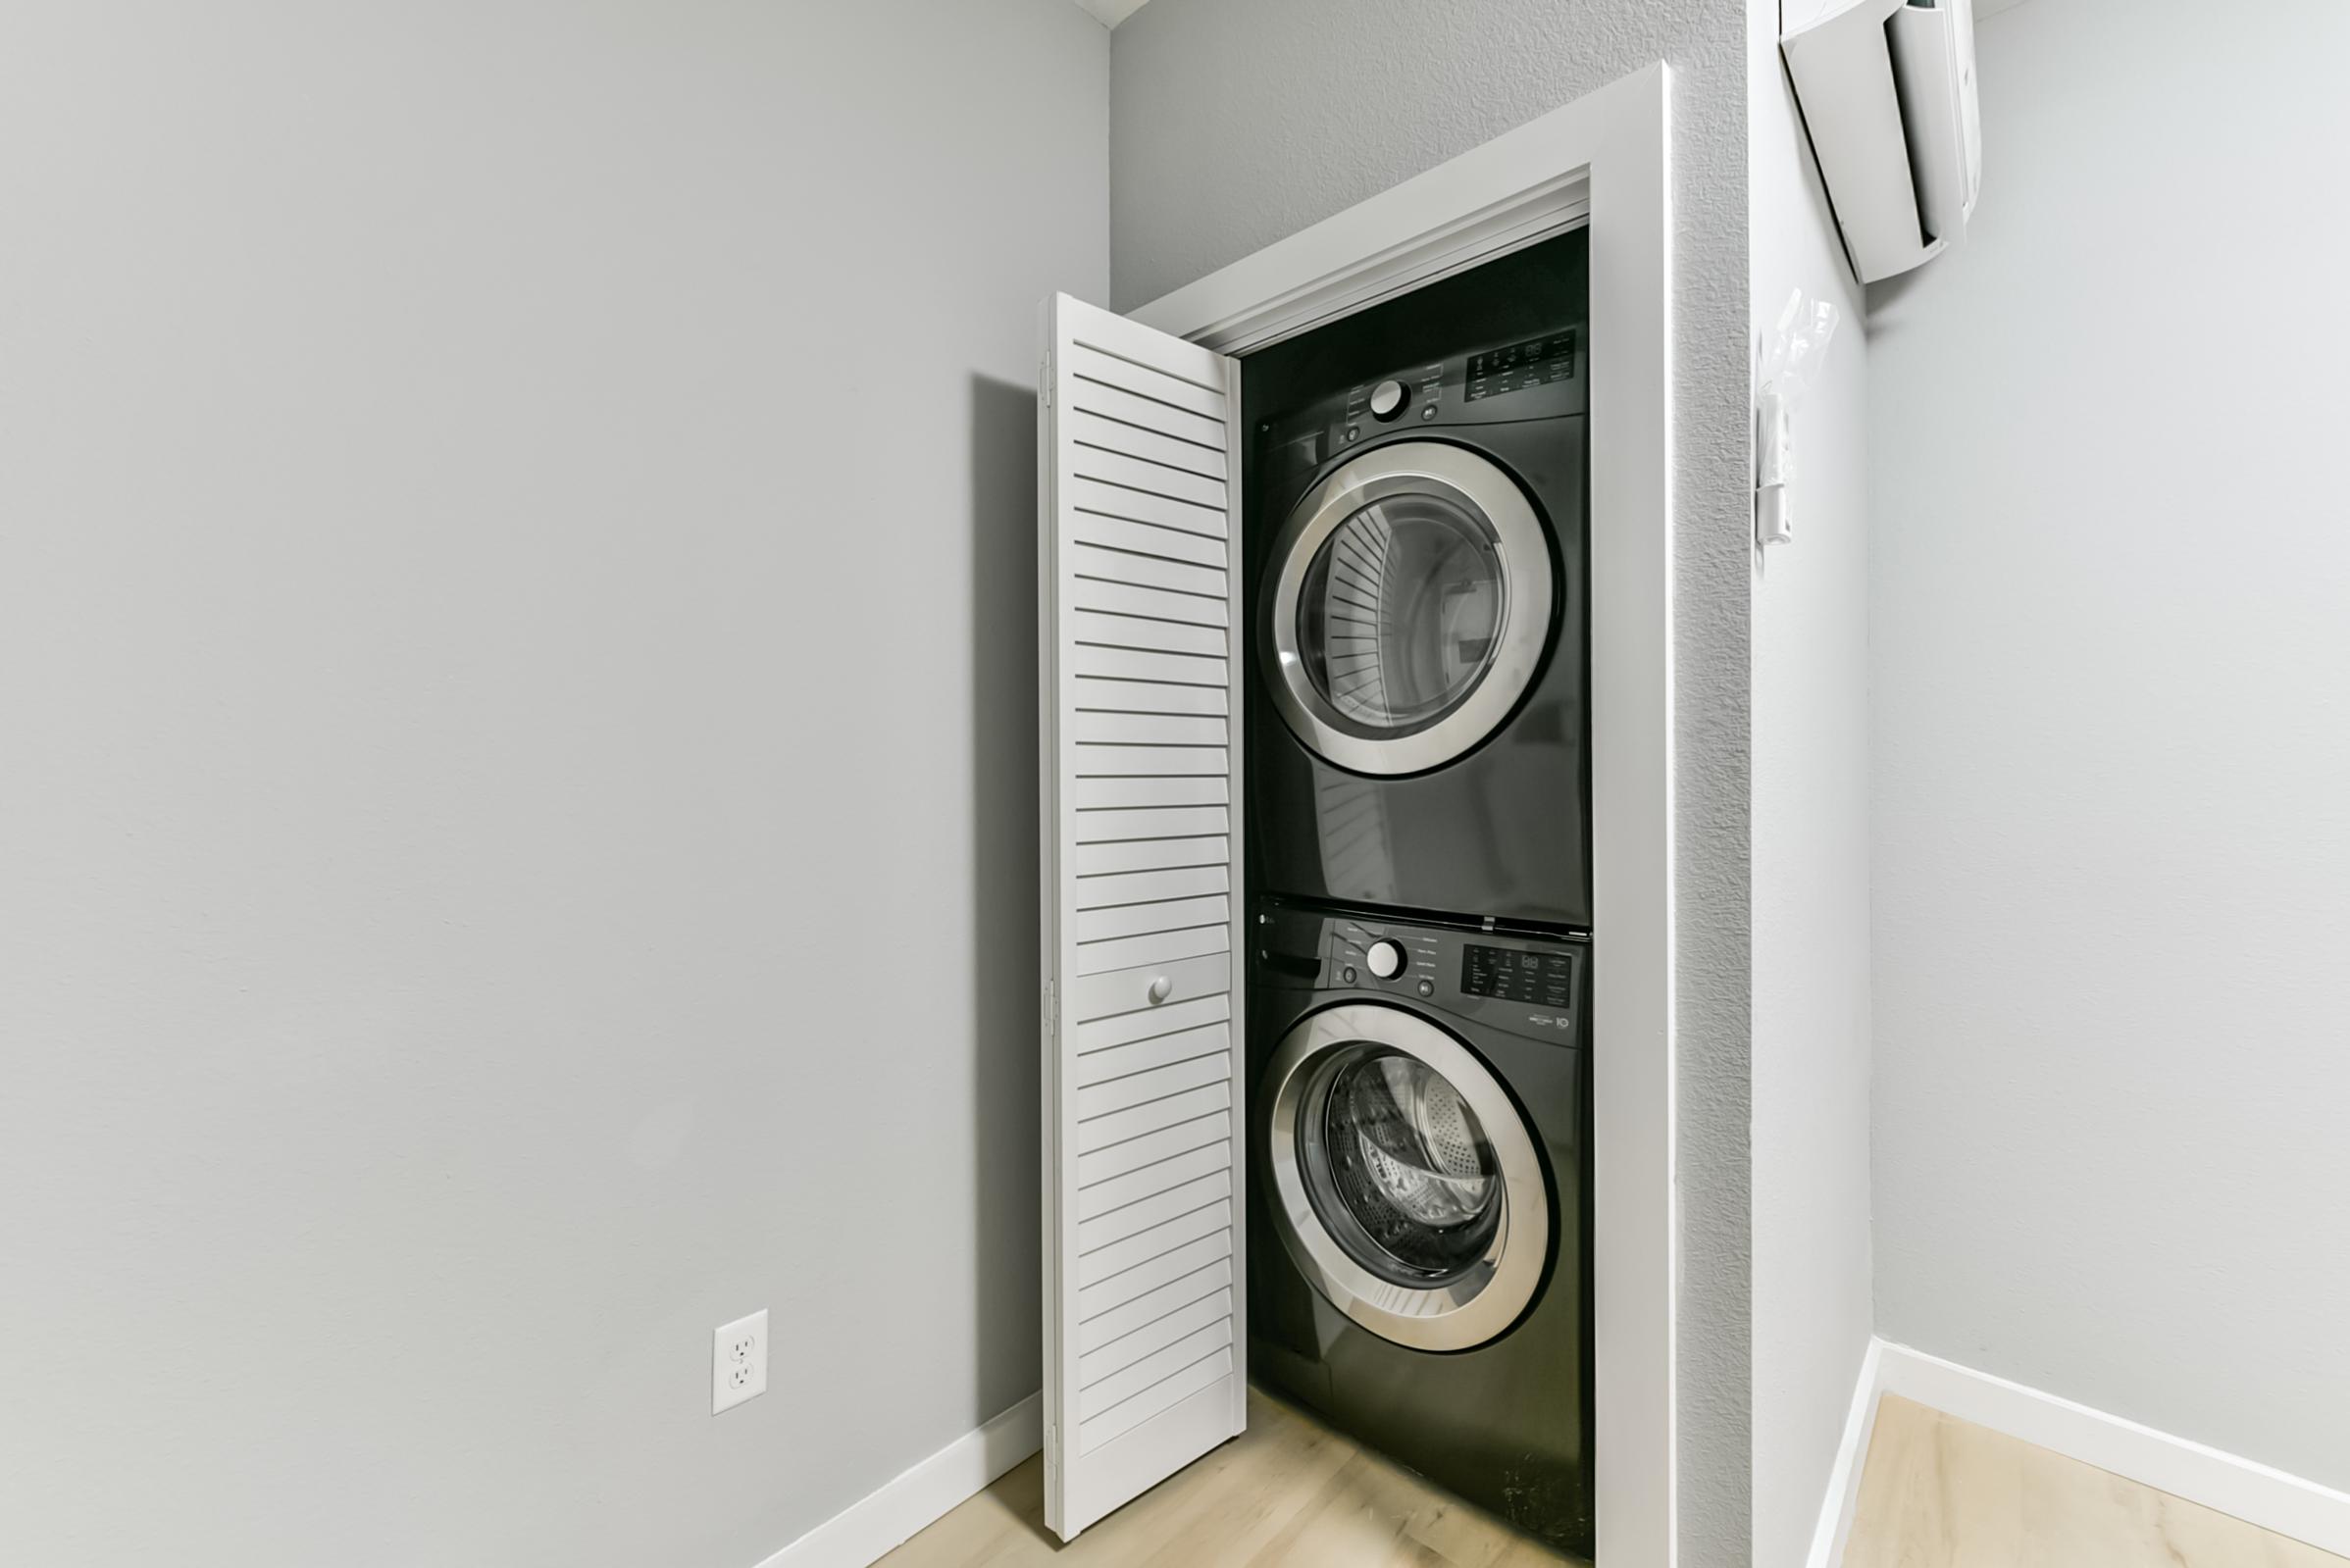 Full size washer and dryer